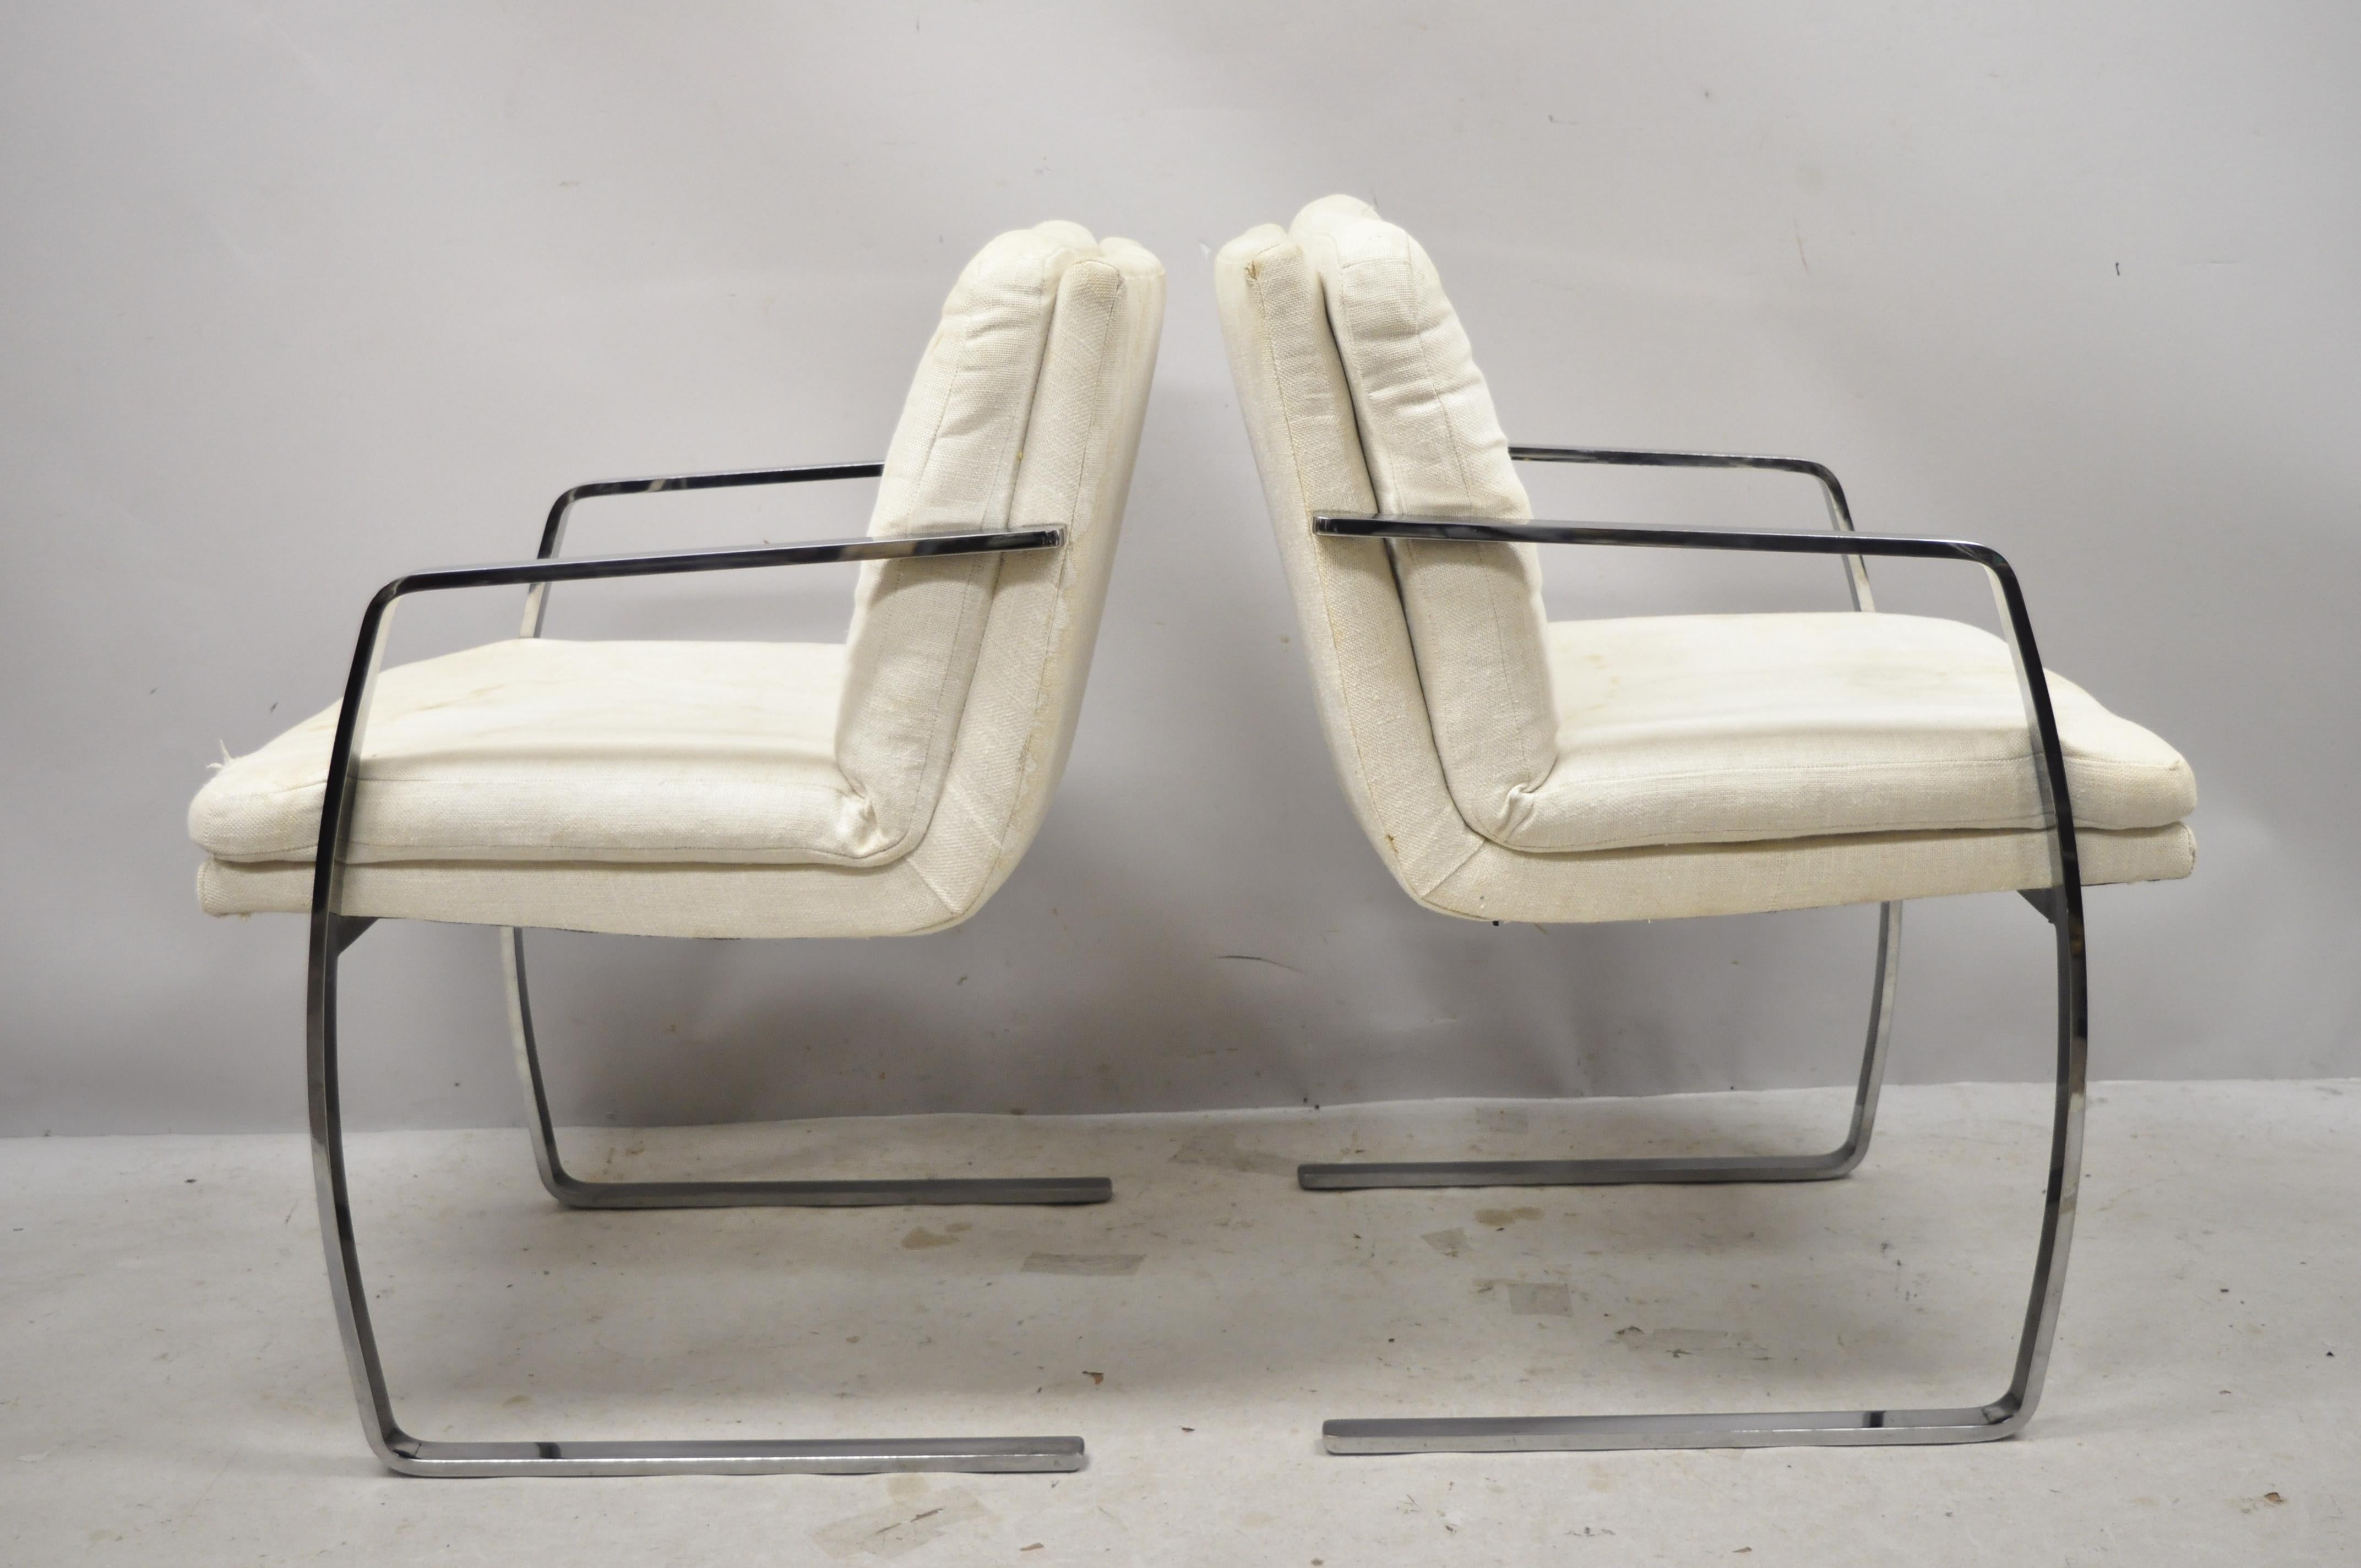 North American Mid-Century Modern BRNO Style Chrome Cantilever Lounge Armchairs 'A', a Pair For Sale